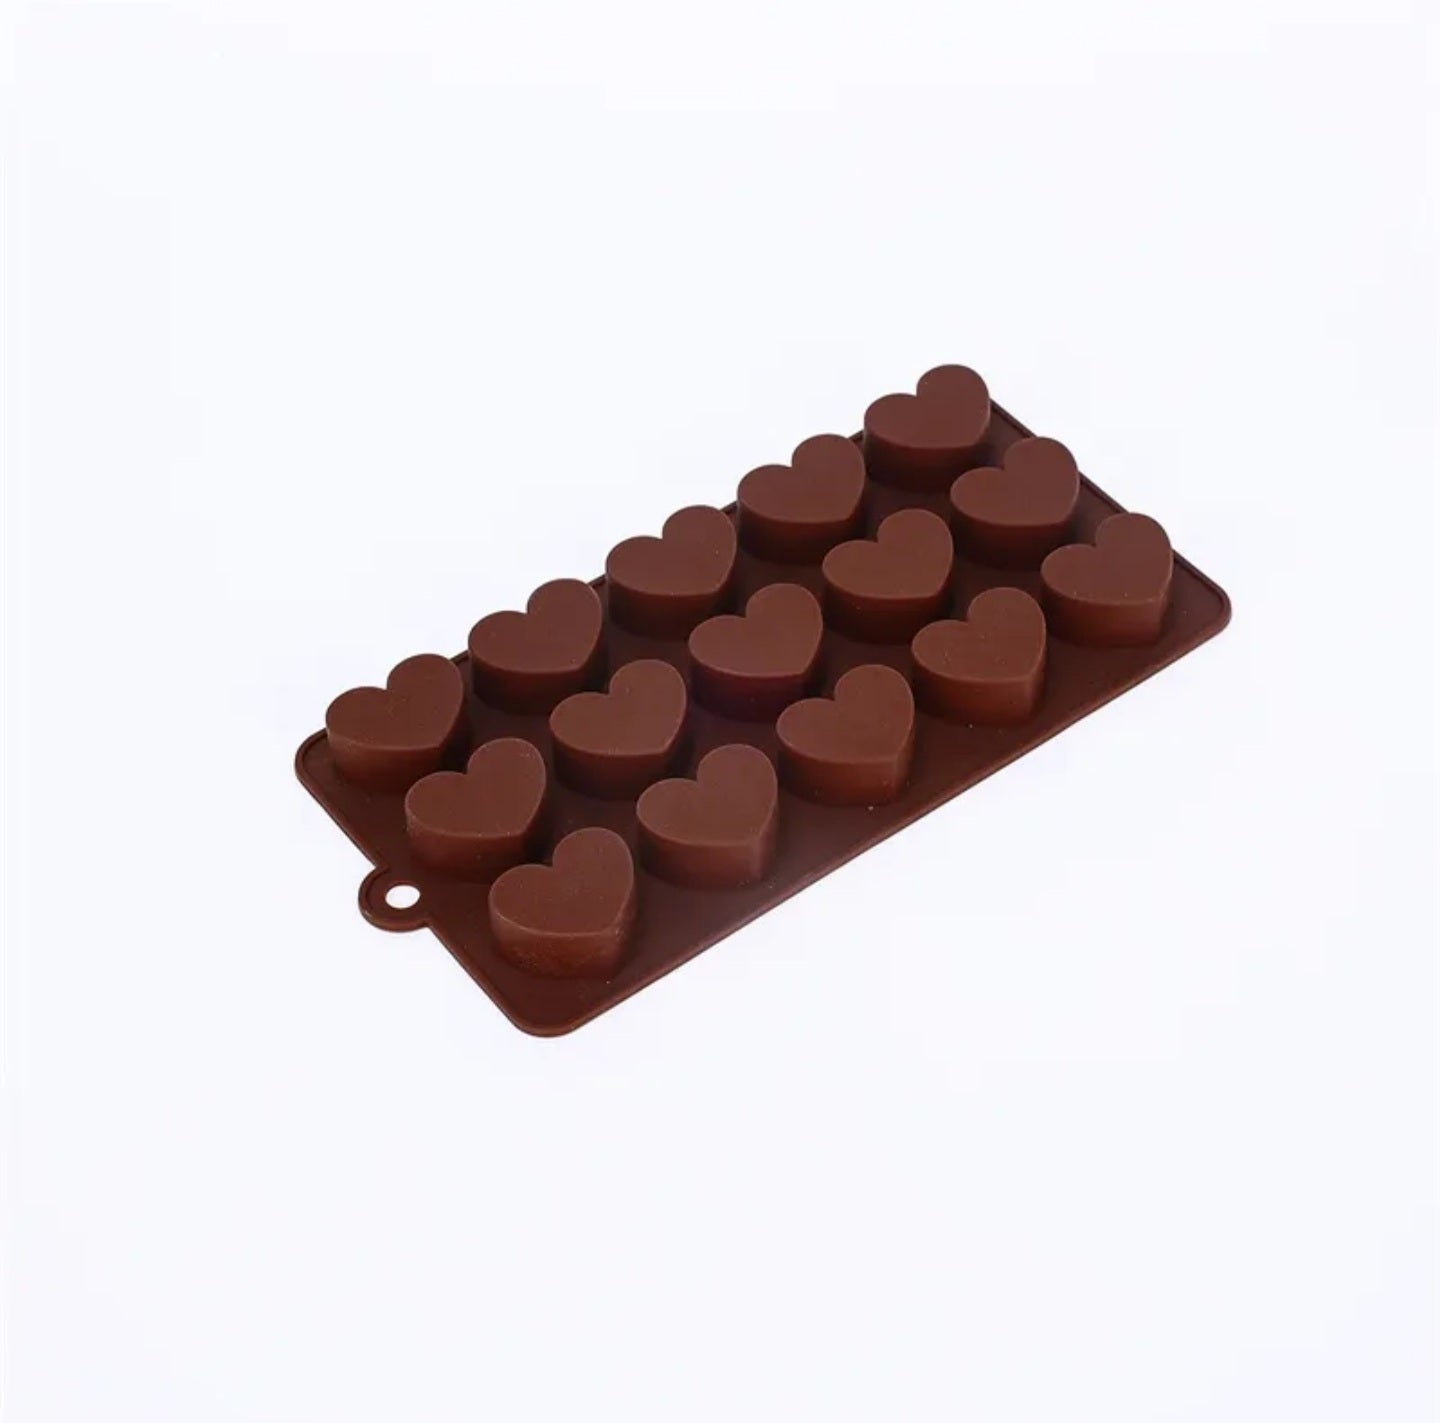 Heart shaped silicone chocolate mold